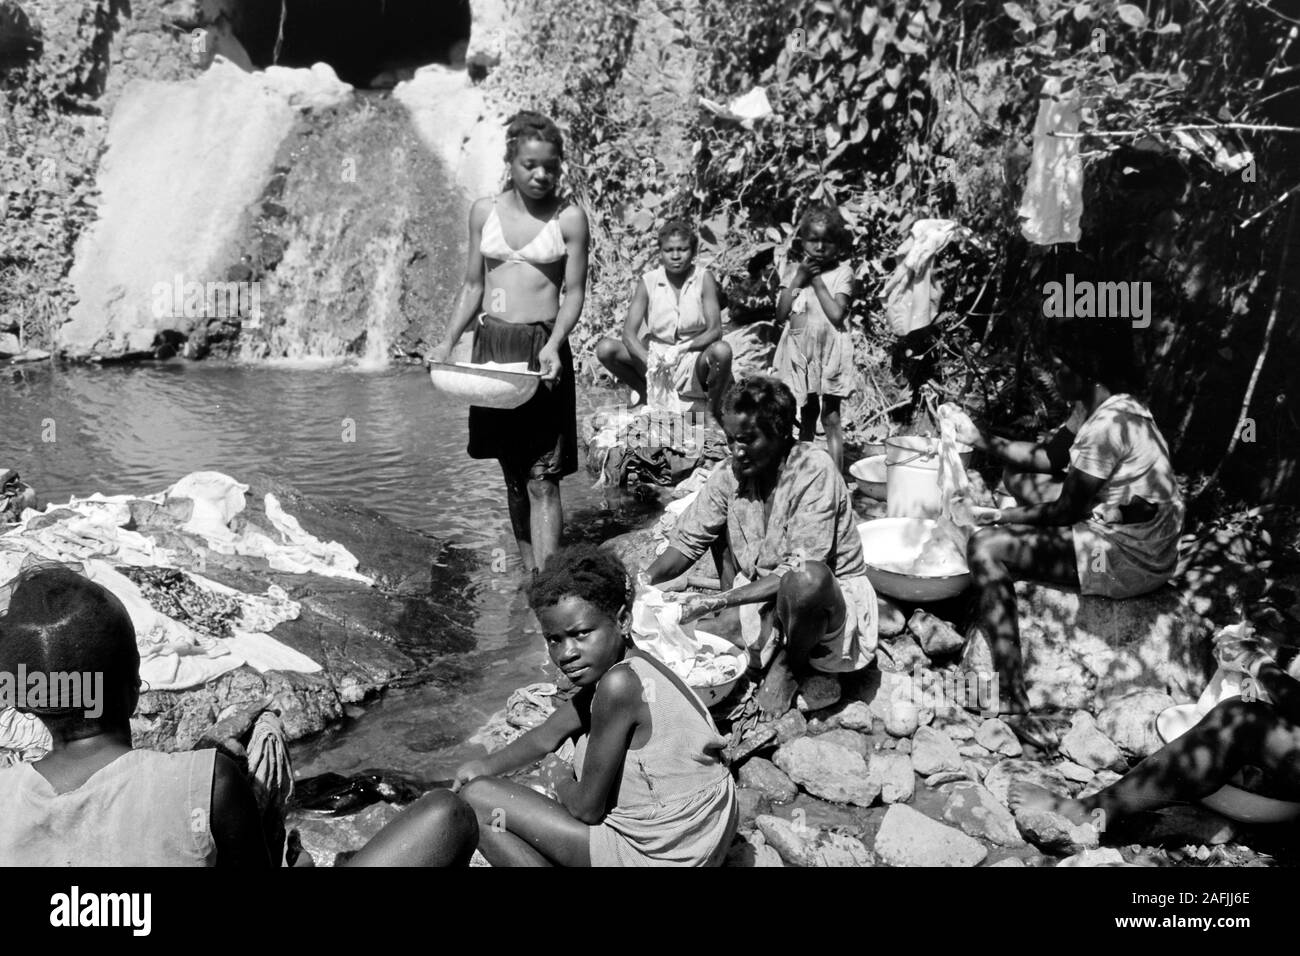 Waschtag am Fluss, 1967. Laundry day by the river, 1967. Stock Photo